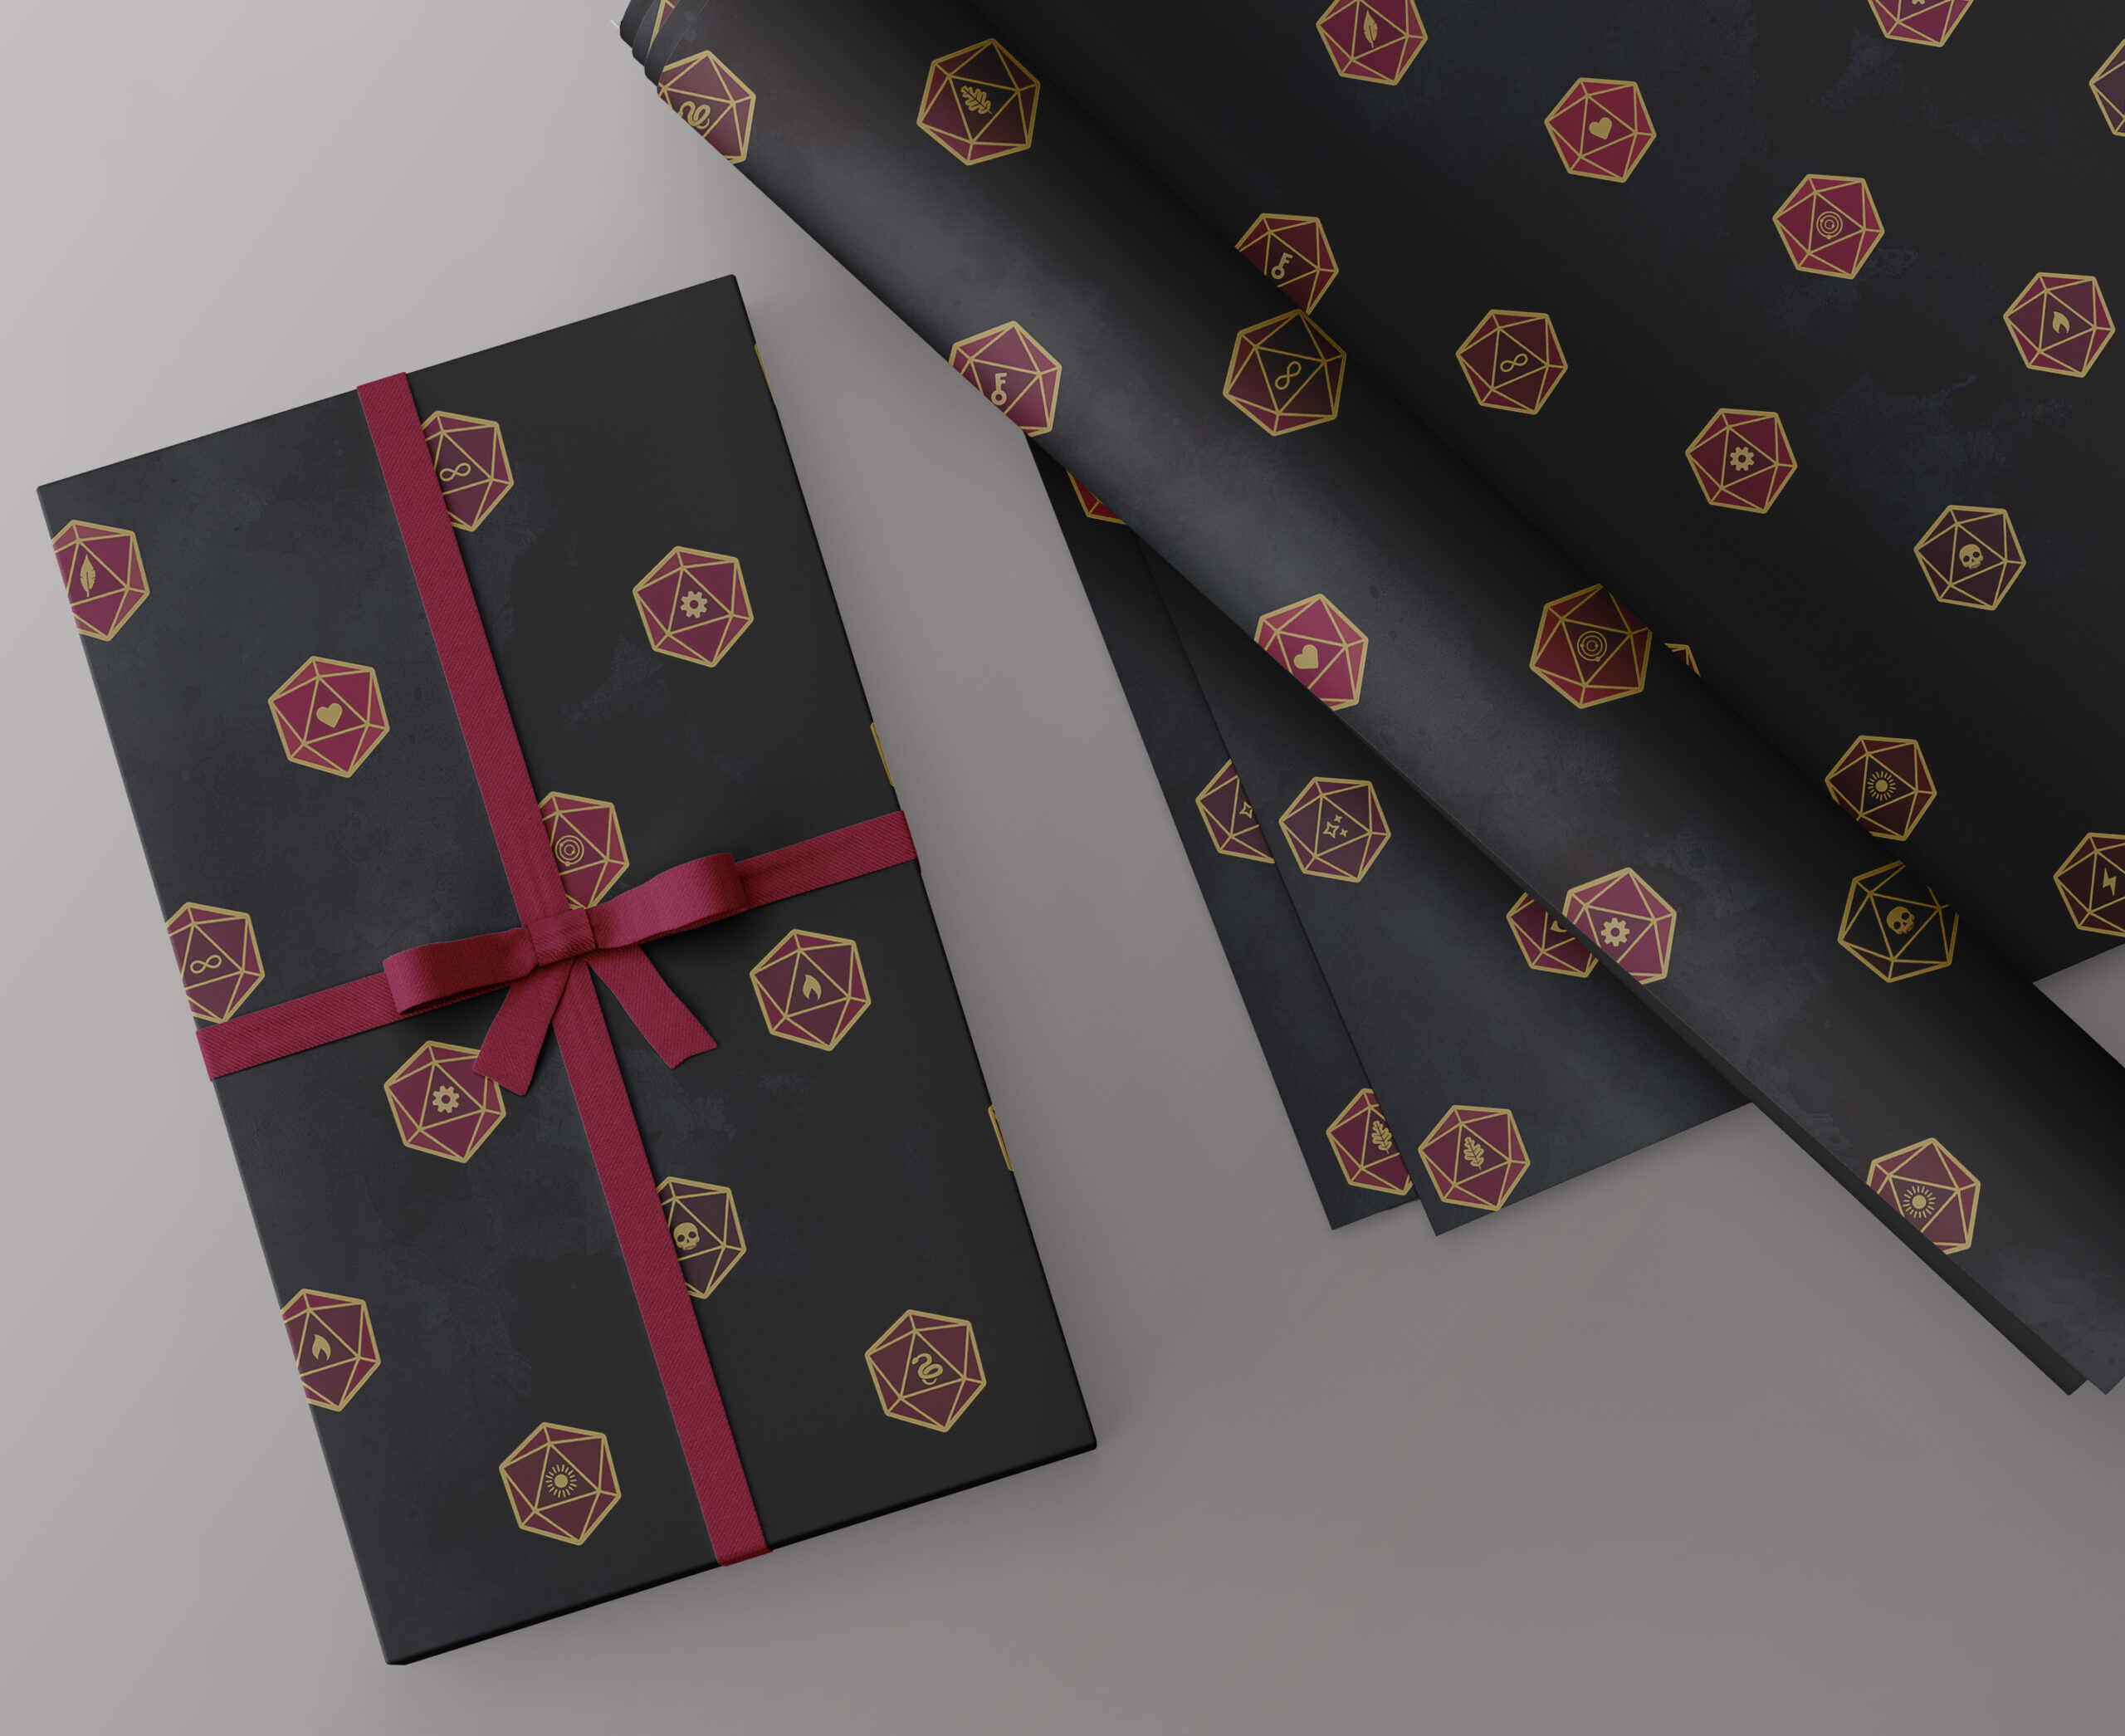 Lunar New Year Wrapping Paper